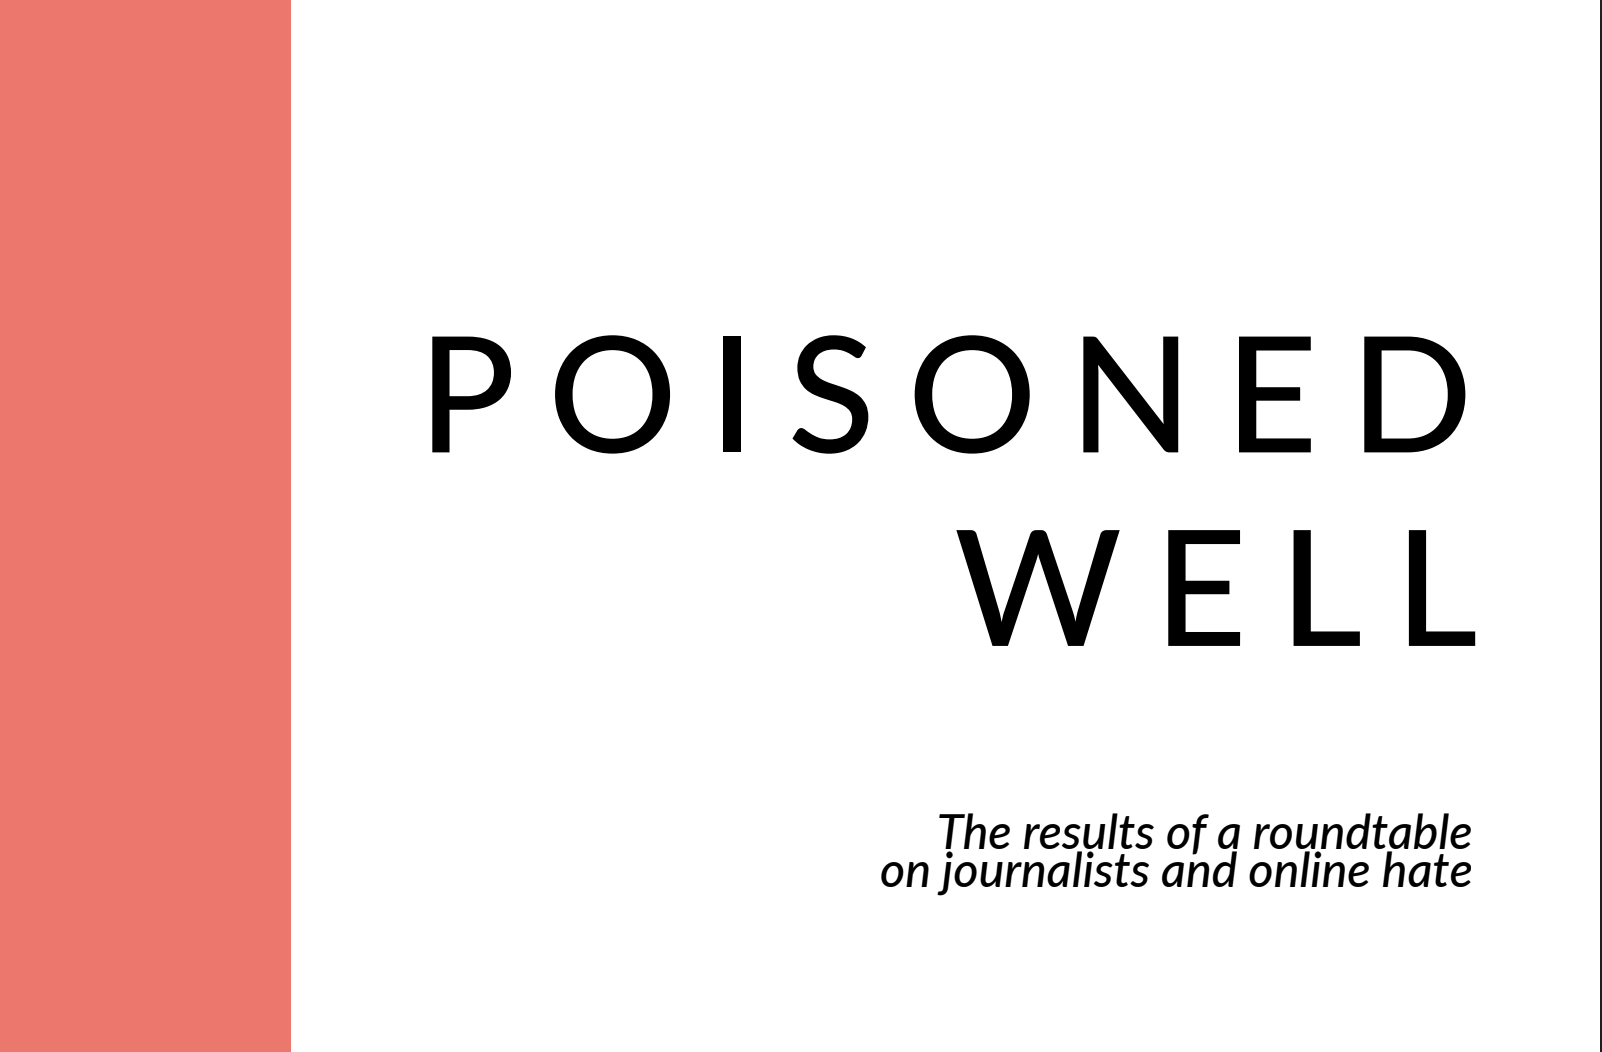 POISONED WELL: The results of a roundtable on journalists and online hate